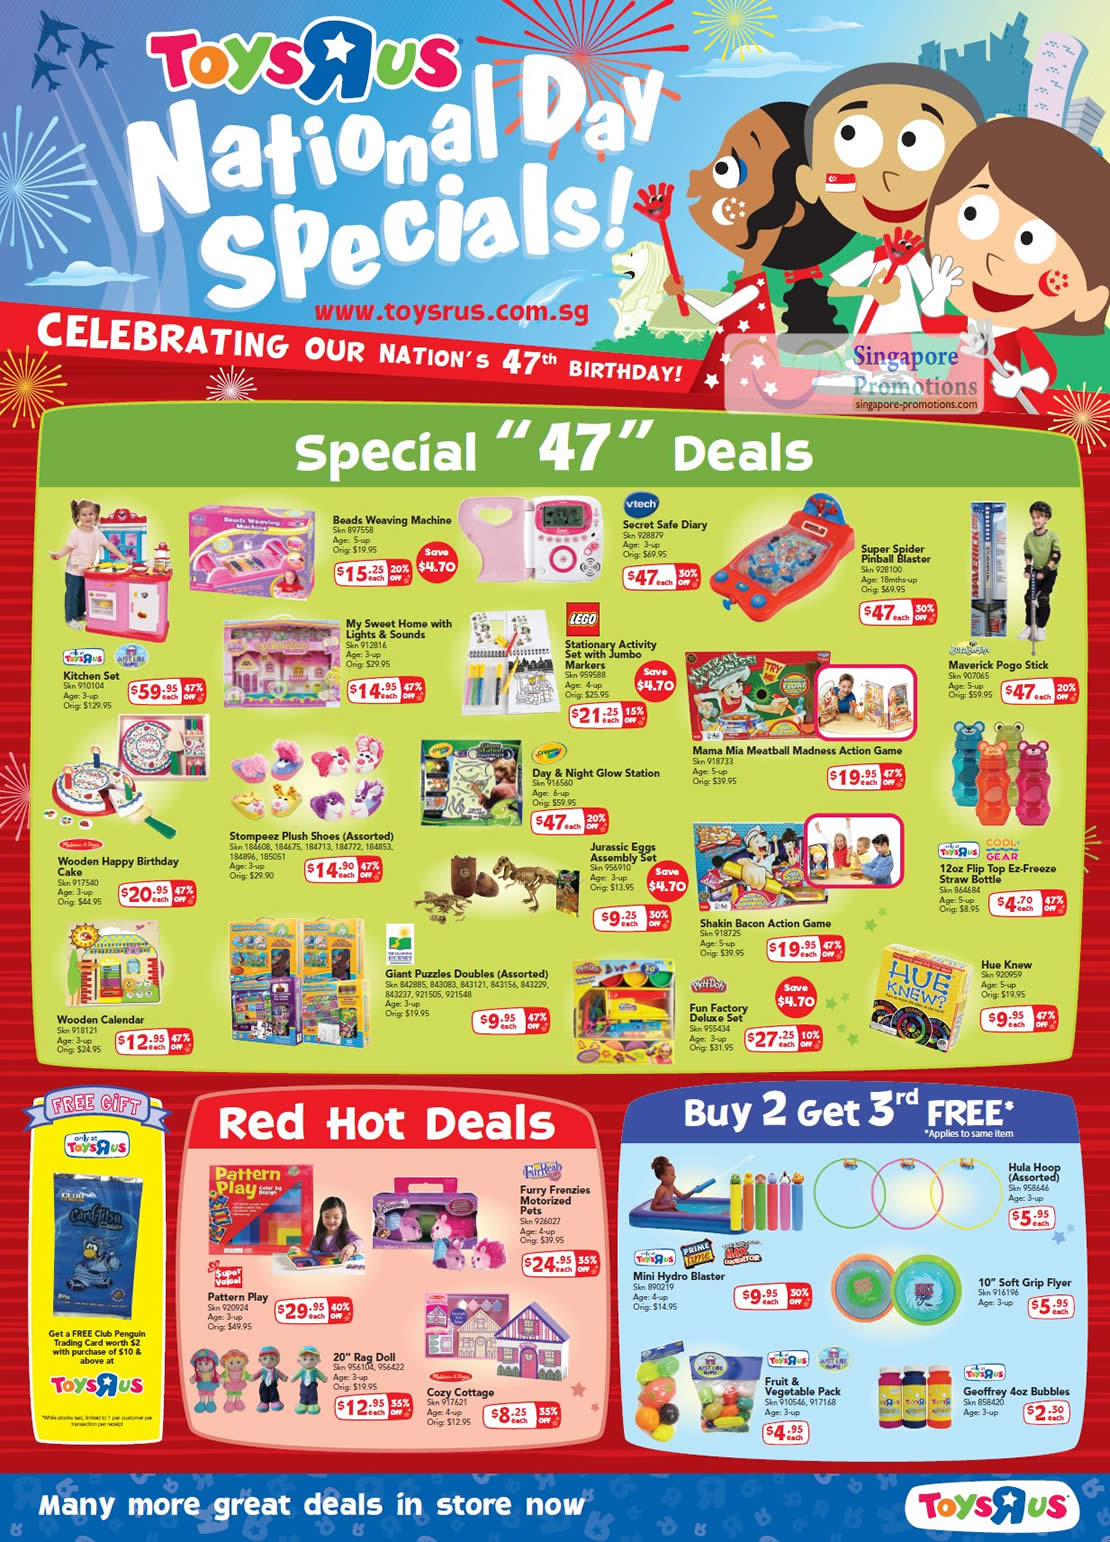 Featured image for Toys "R" Us National Day Special Promotion Offers 2 - 20 Aug 2012 